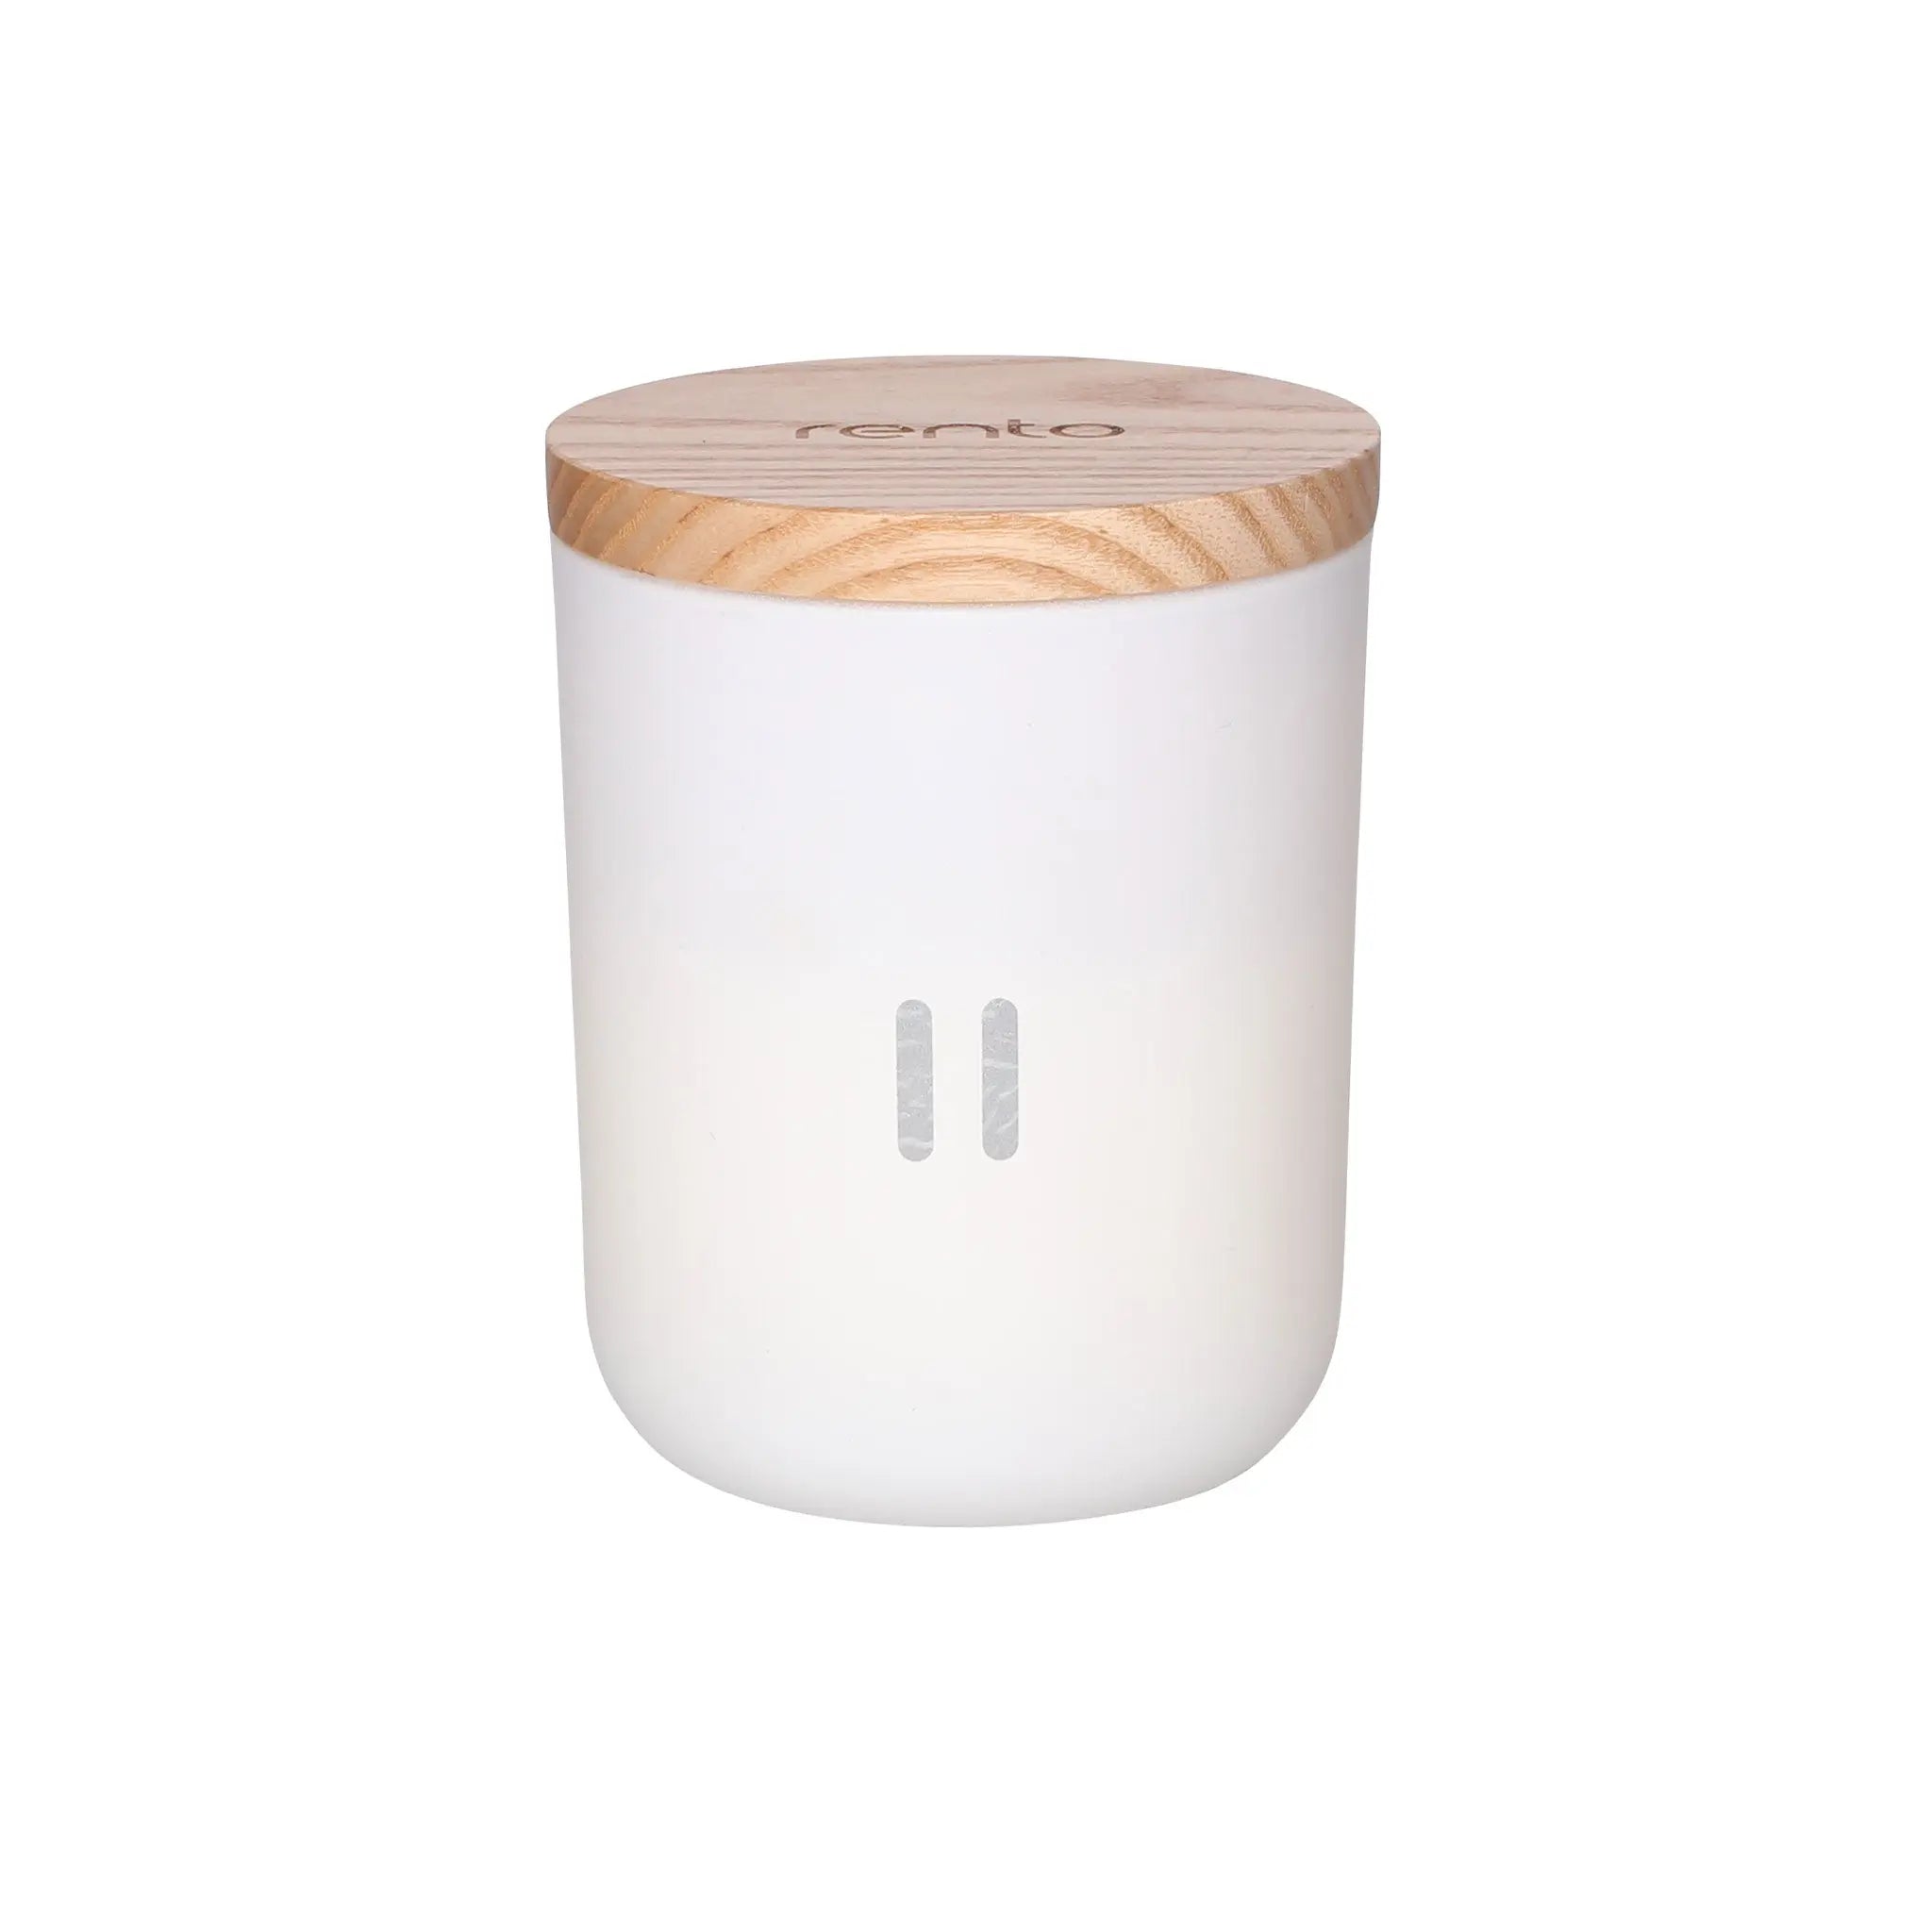 Rento Birch Scented Candle Scented Candle | Finnmark Sauna